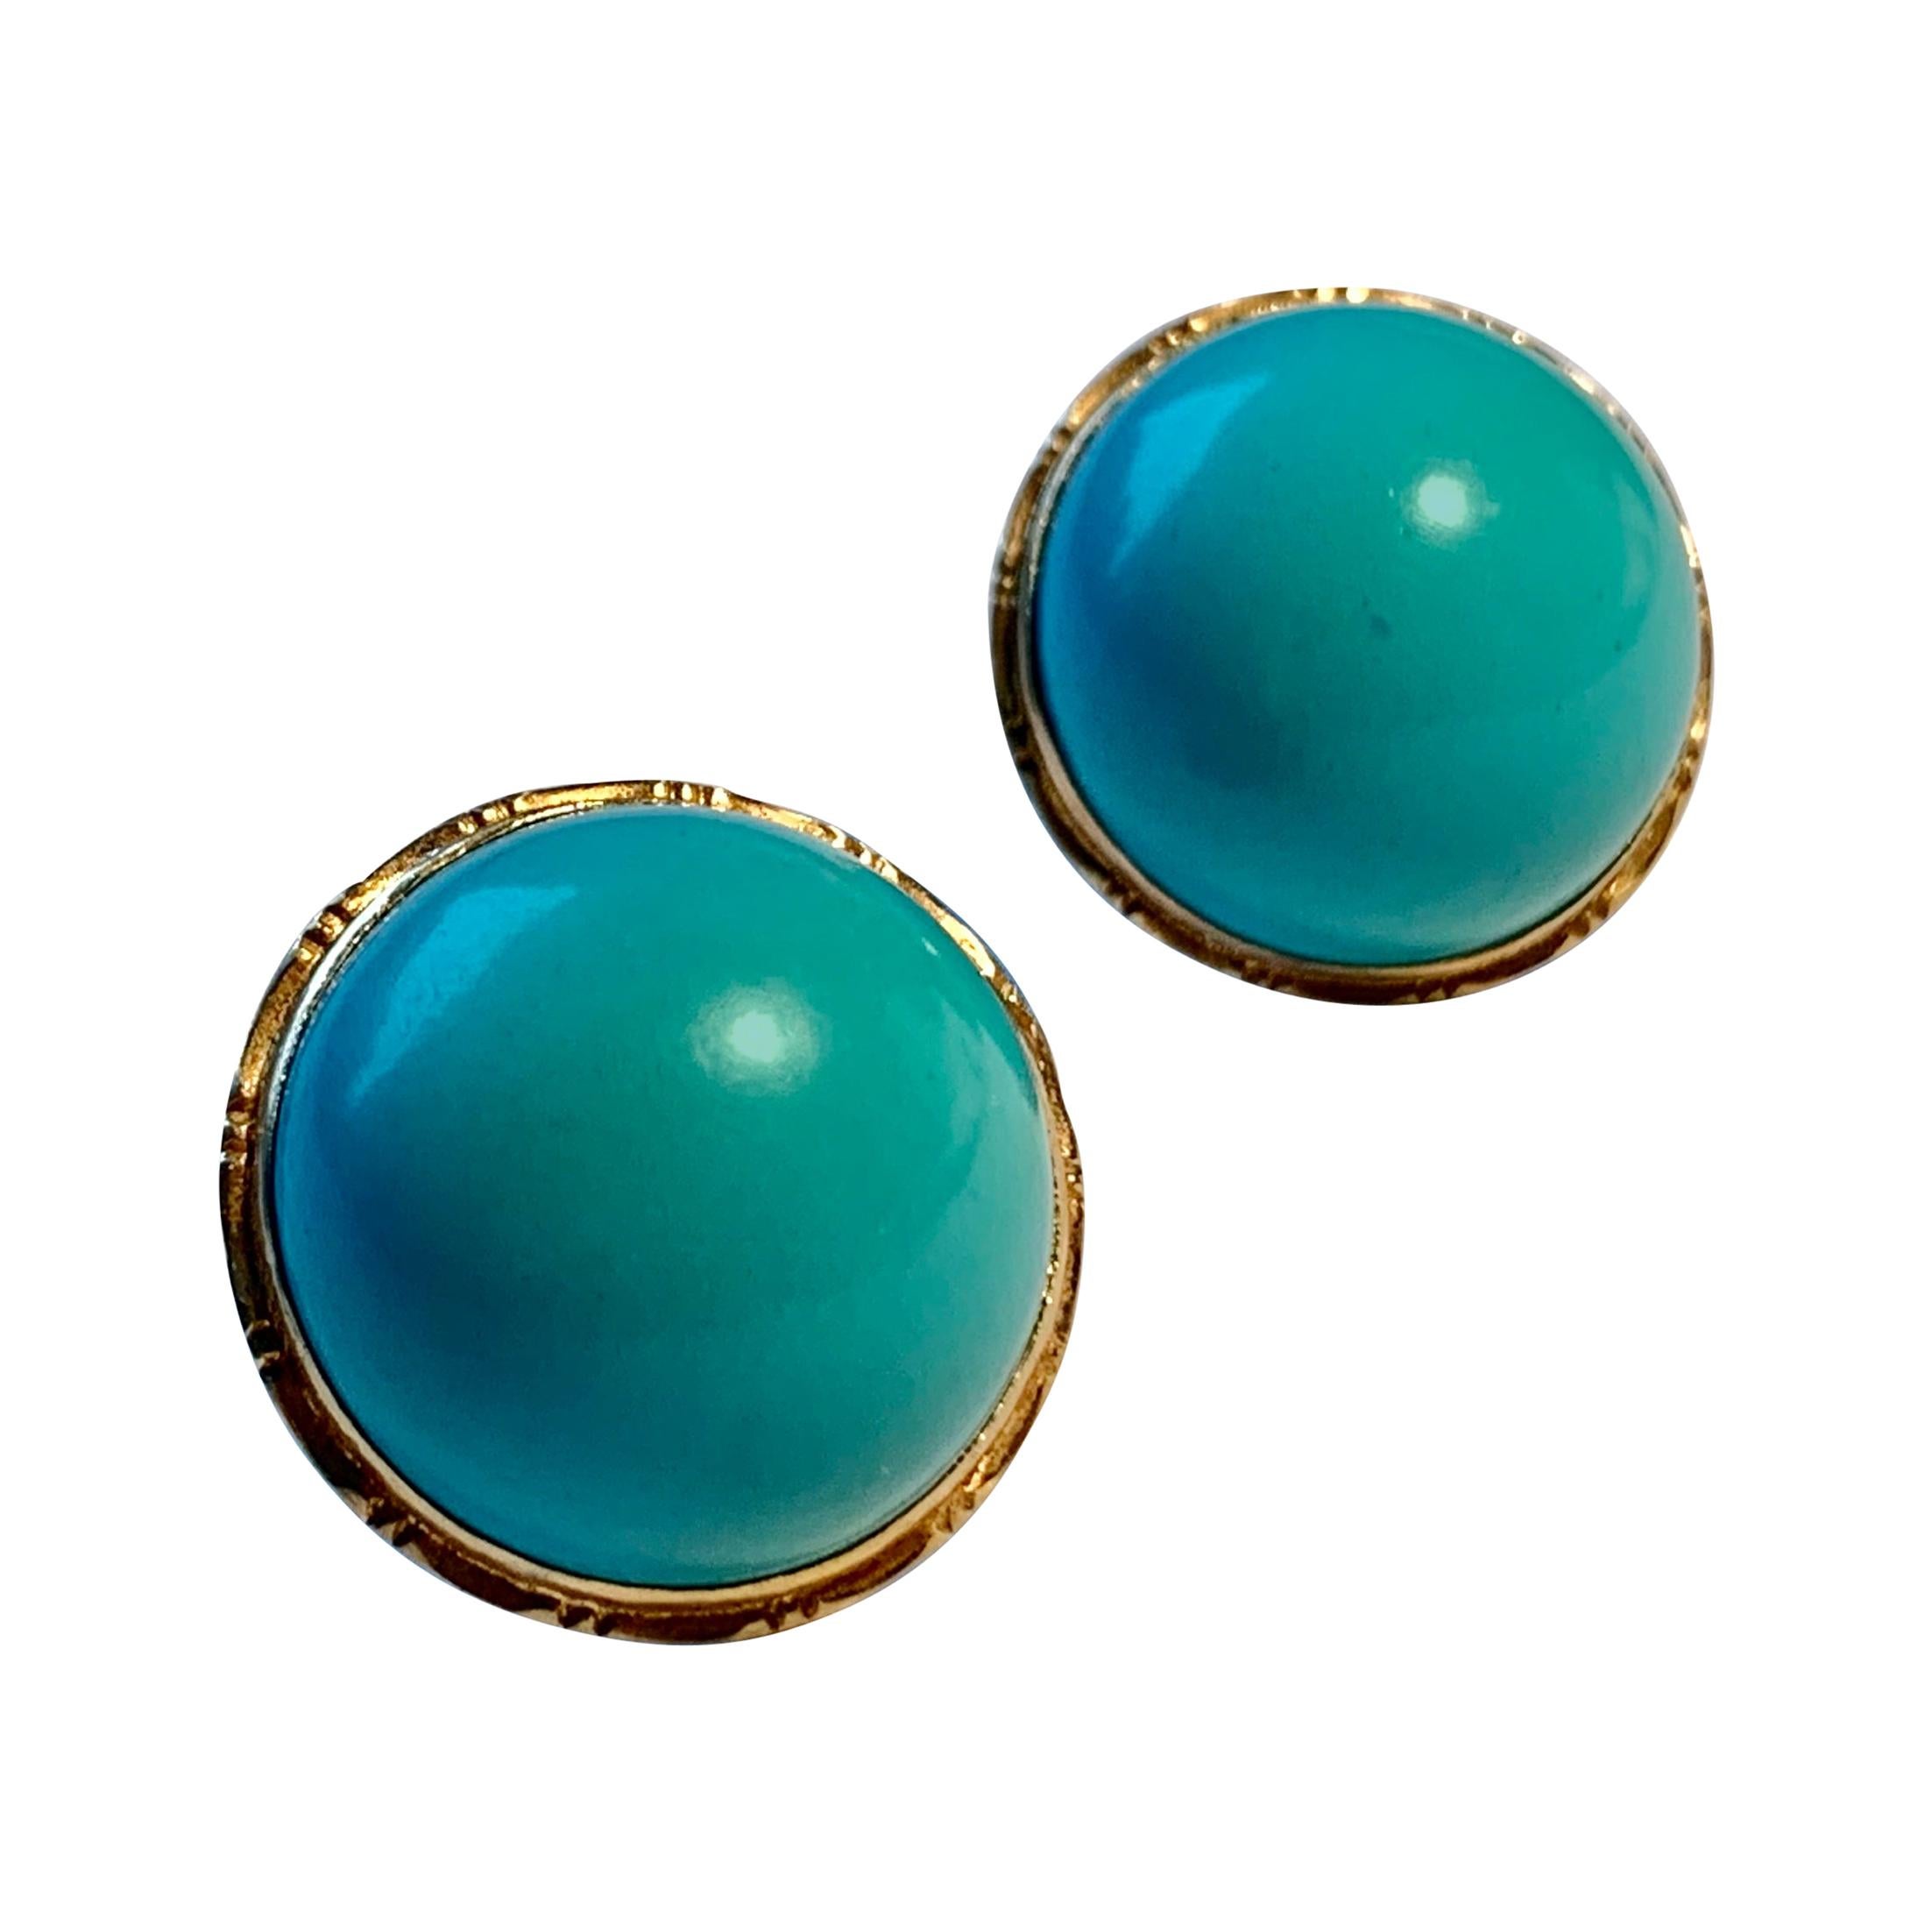  Turquoise  Round Cabochon Stone Earrings set in Engraved 14 K Gold Settings